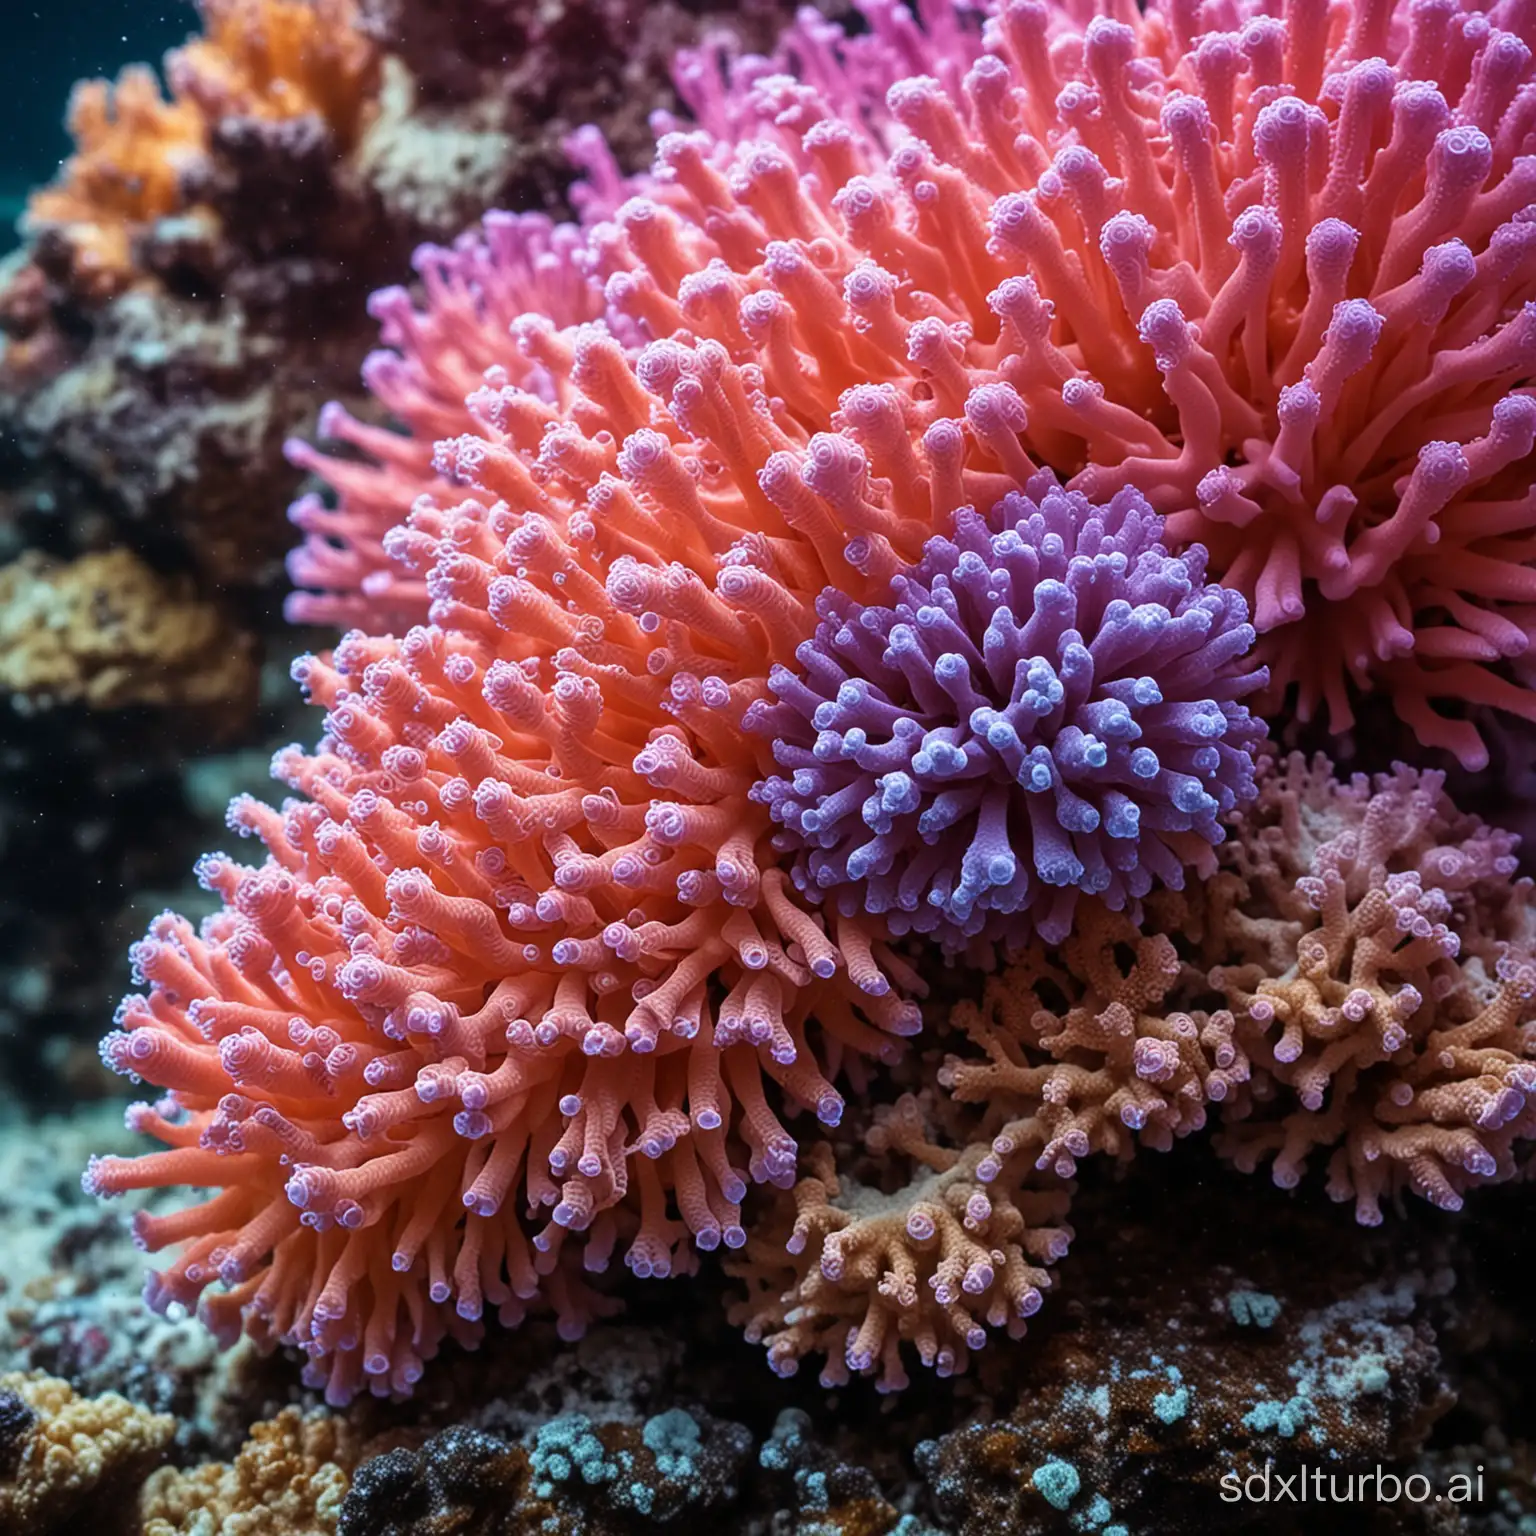 A cluster of intricate coral formations erupted in hues of orange, pink and purple, delicate marine habitats, hidden treasures, macro perspective, sense of discovery, underwater colorfulness, water droplets reflect blue surrounding waters, Olympus Tough TG-6, macro lens at f/2, selective focus, --style random --stylize 100 --weird 1000 --ar 4:3 --v 6